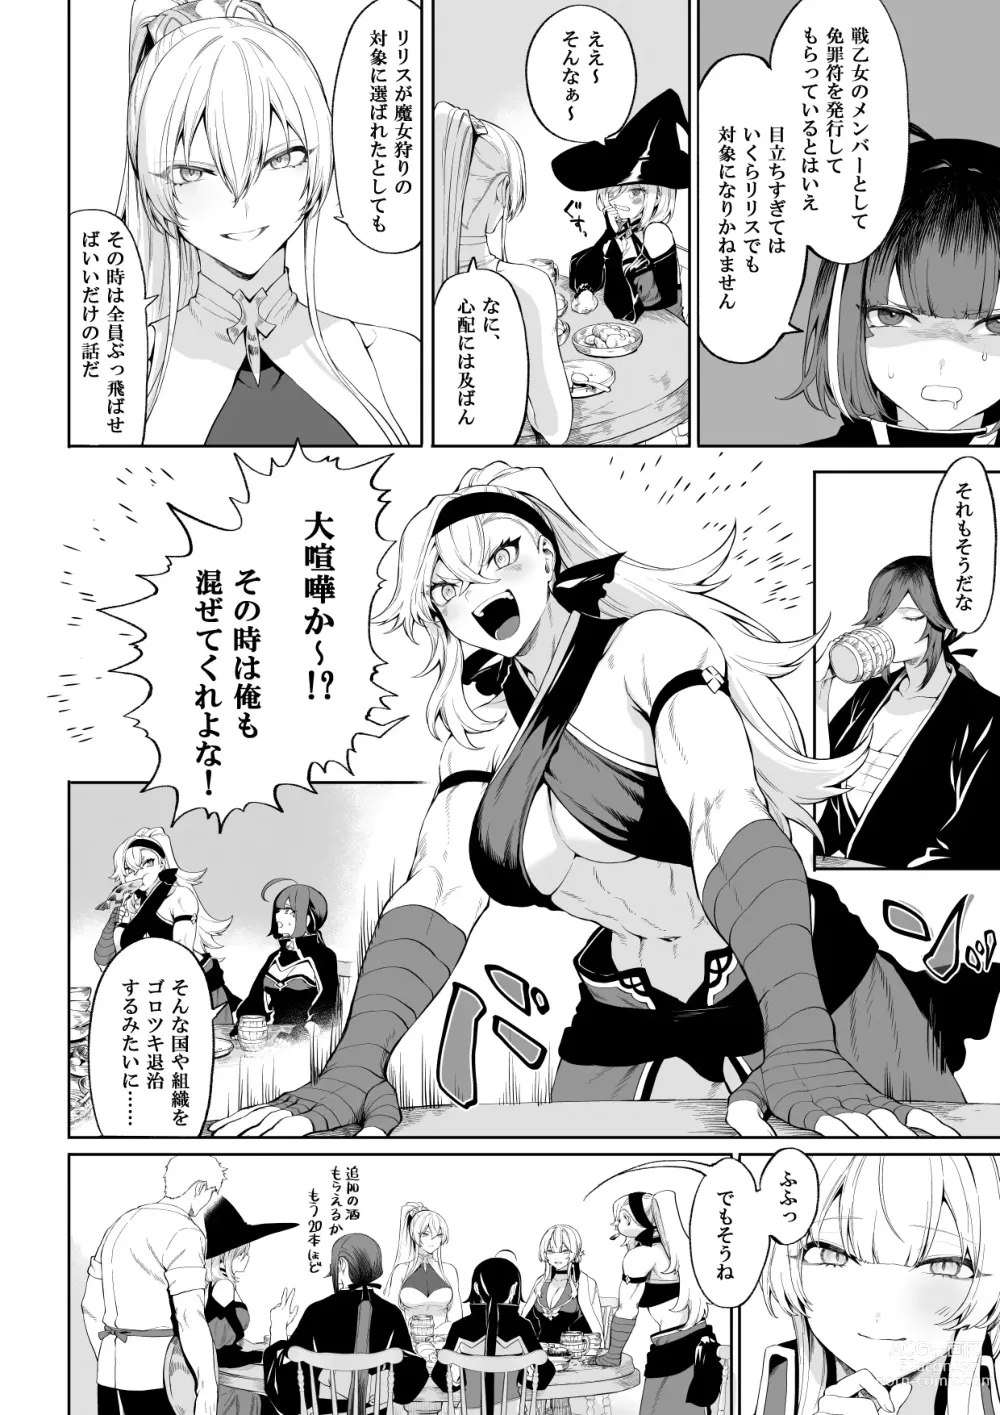 Page 7 of doujinshi 戦乙女といくさごと！〜女魔法使い編〜